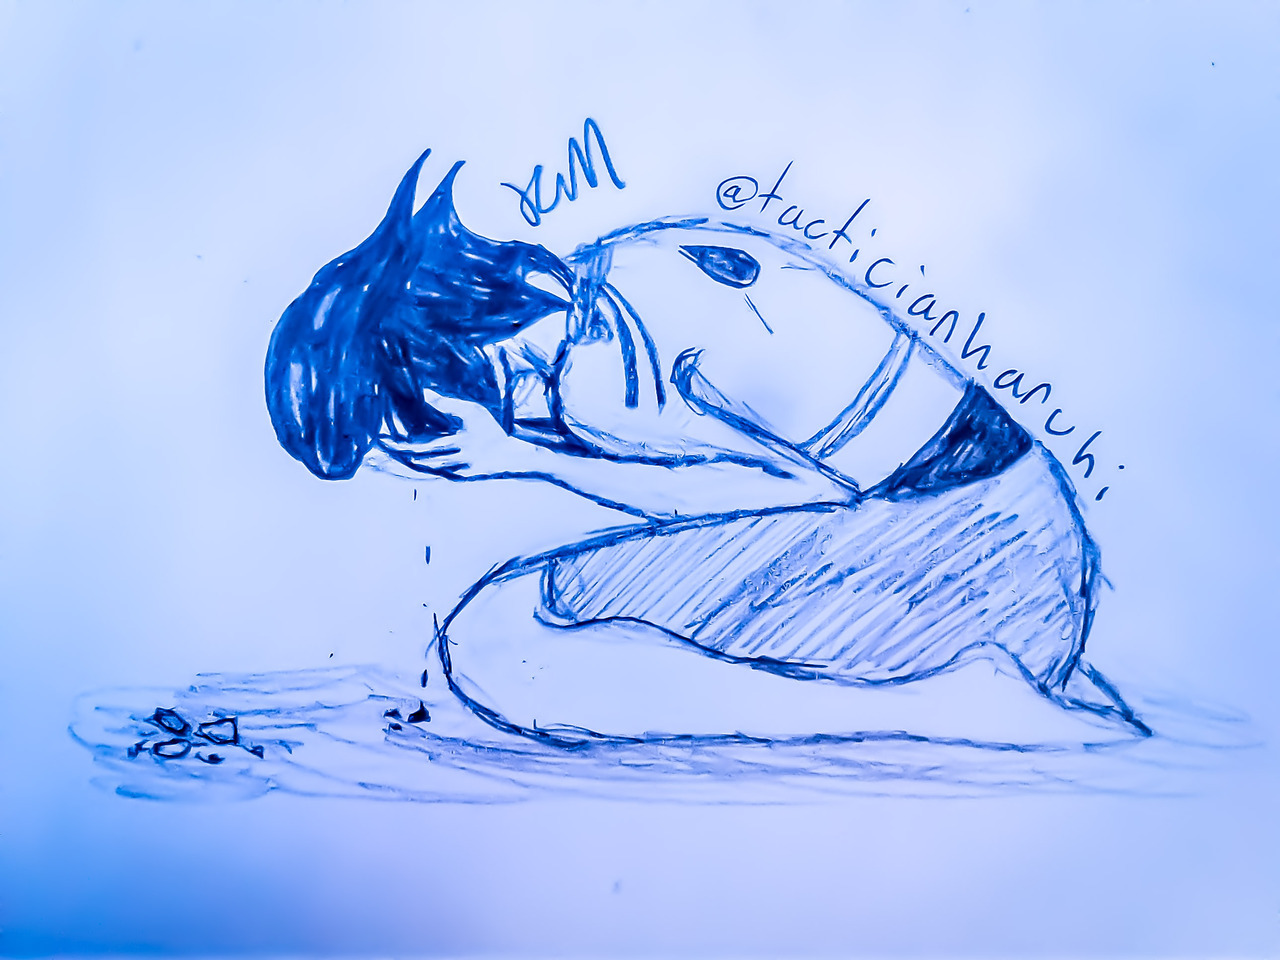 “I never should have left you! I’m sorry!” Angsty Lapis requested by: @leafiscoolnessm